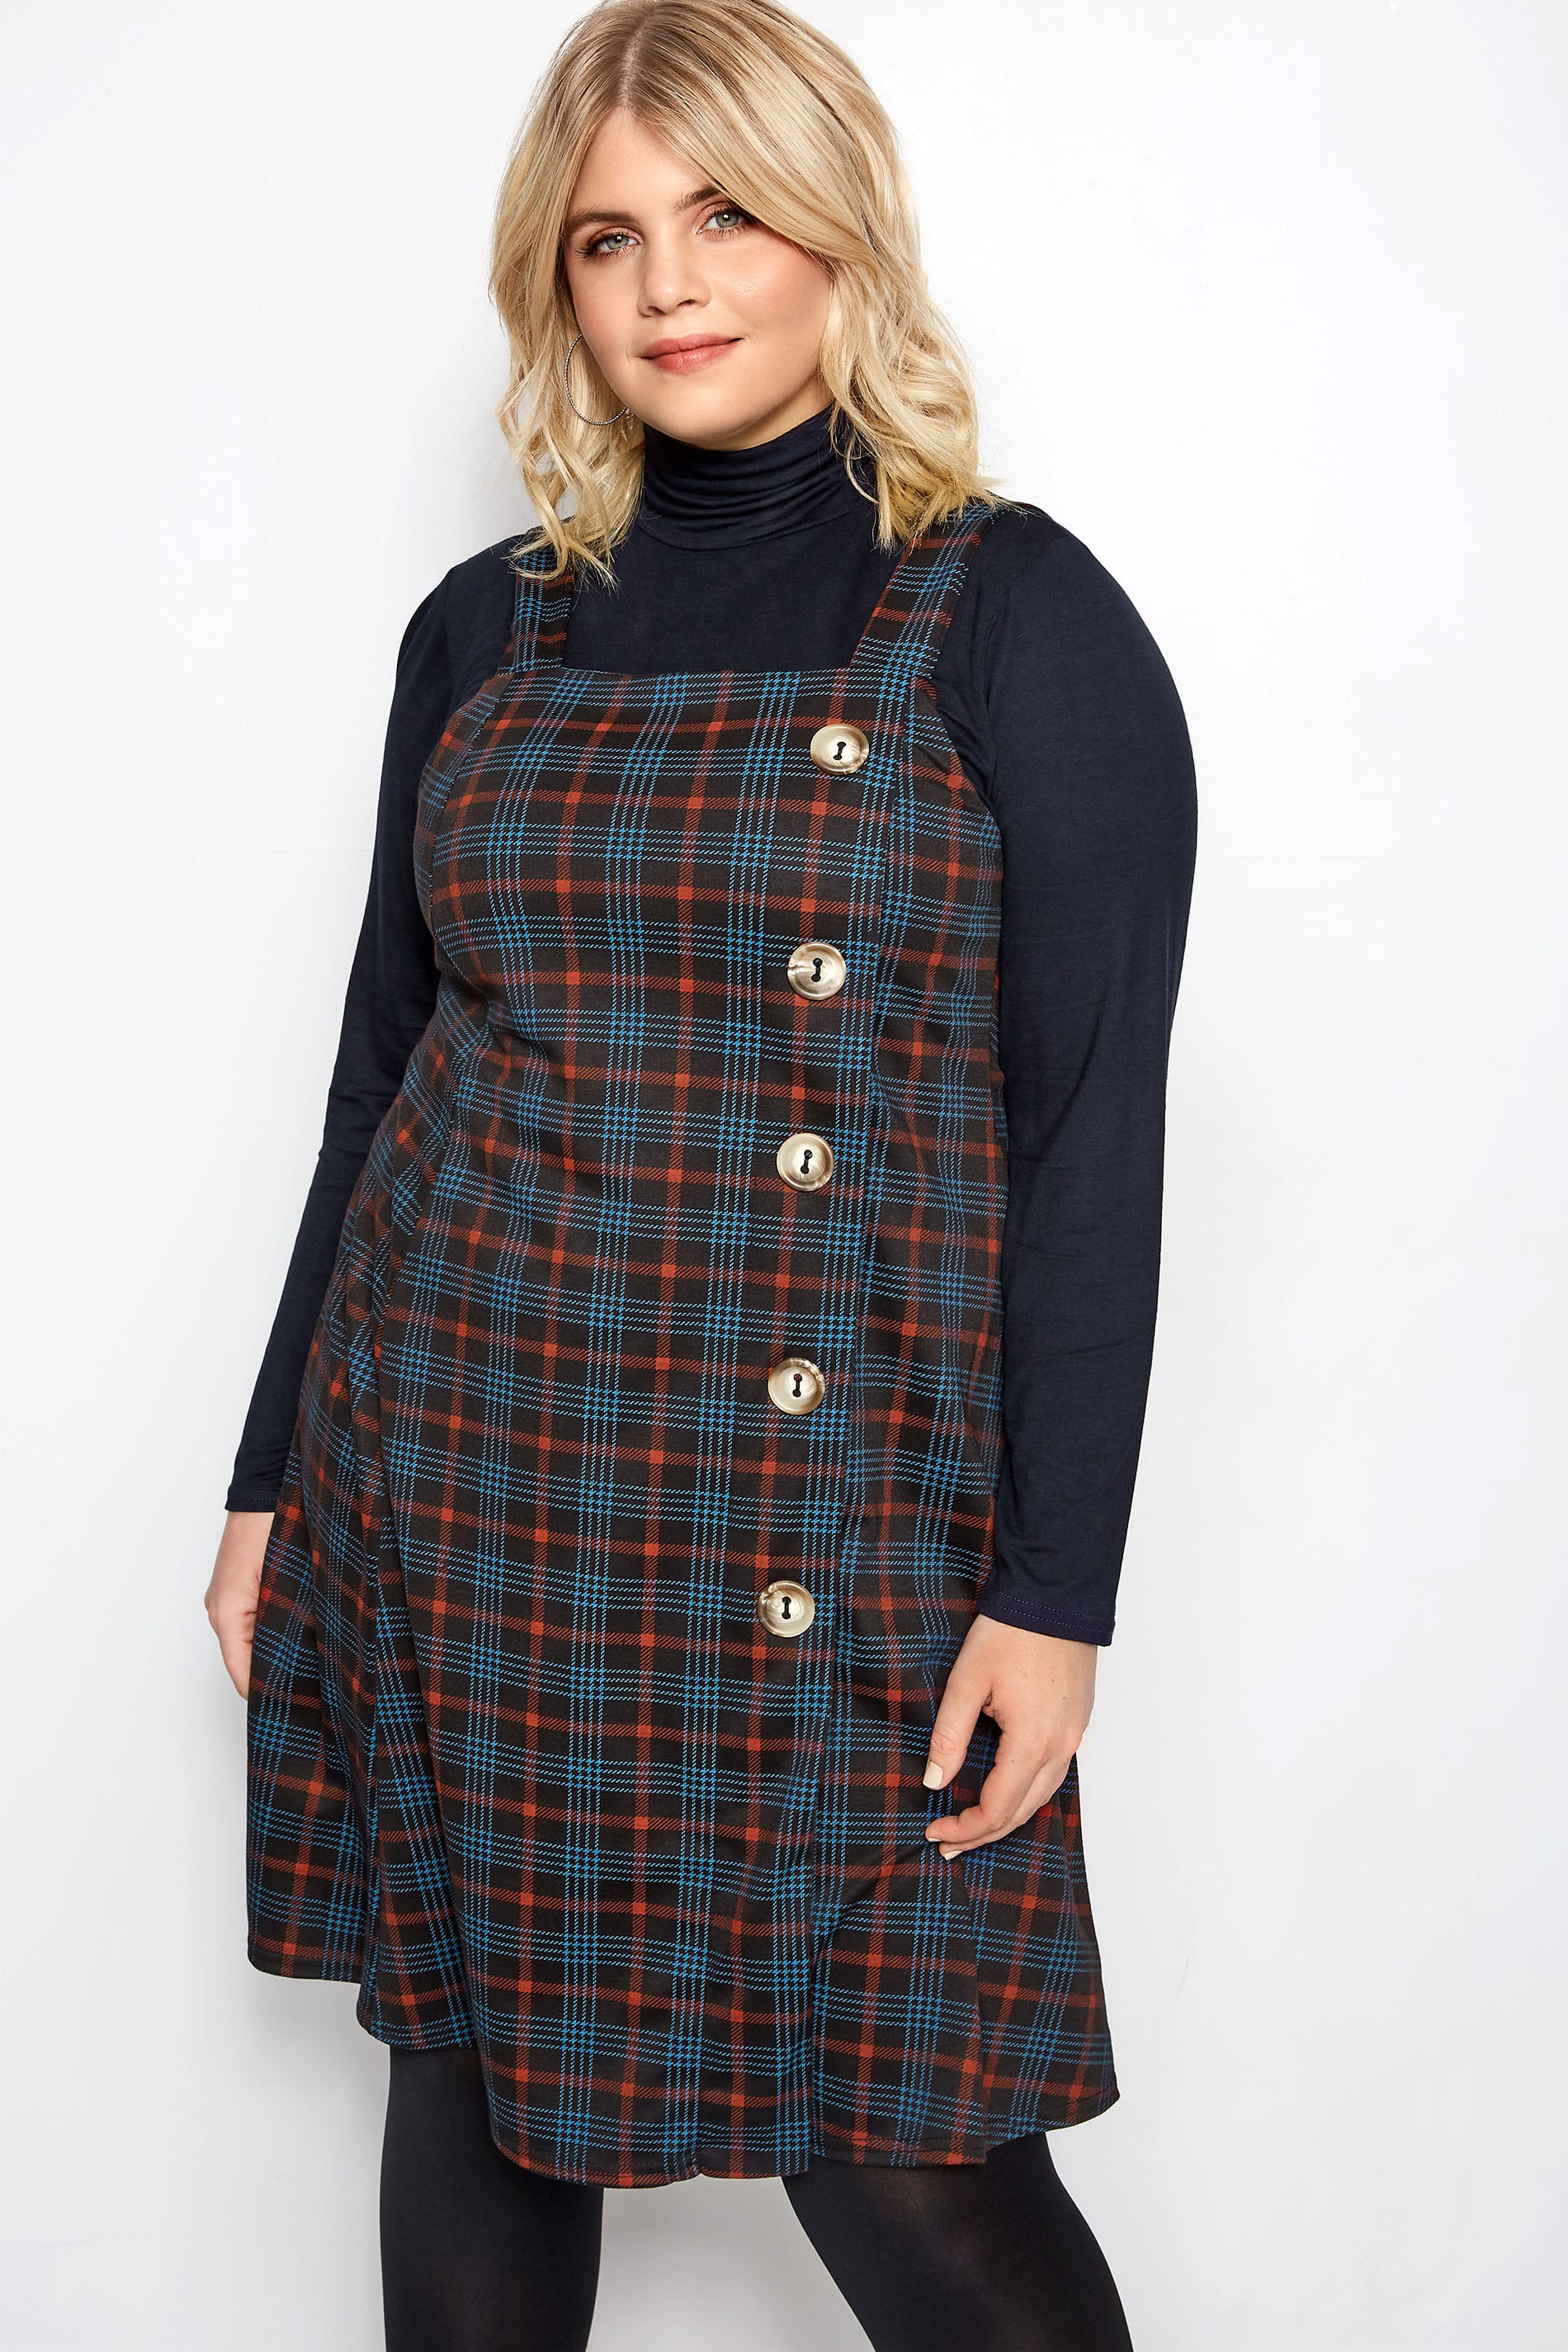 Plus Size Black & Red Check Button Pinafore Dress | Sizes 16 to 36 ...